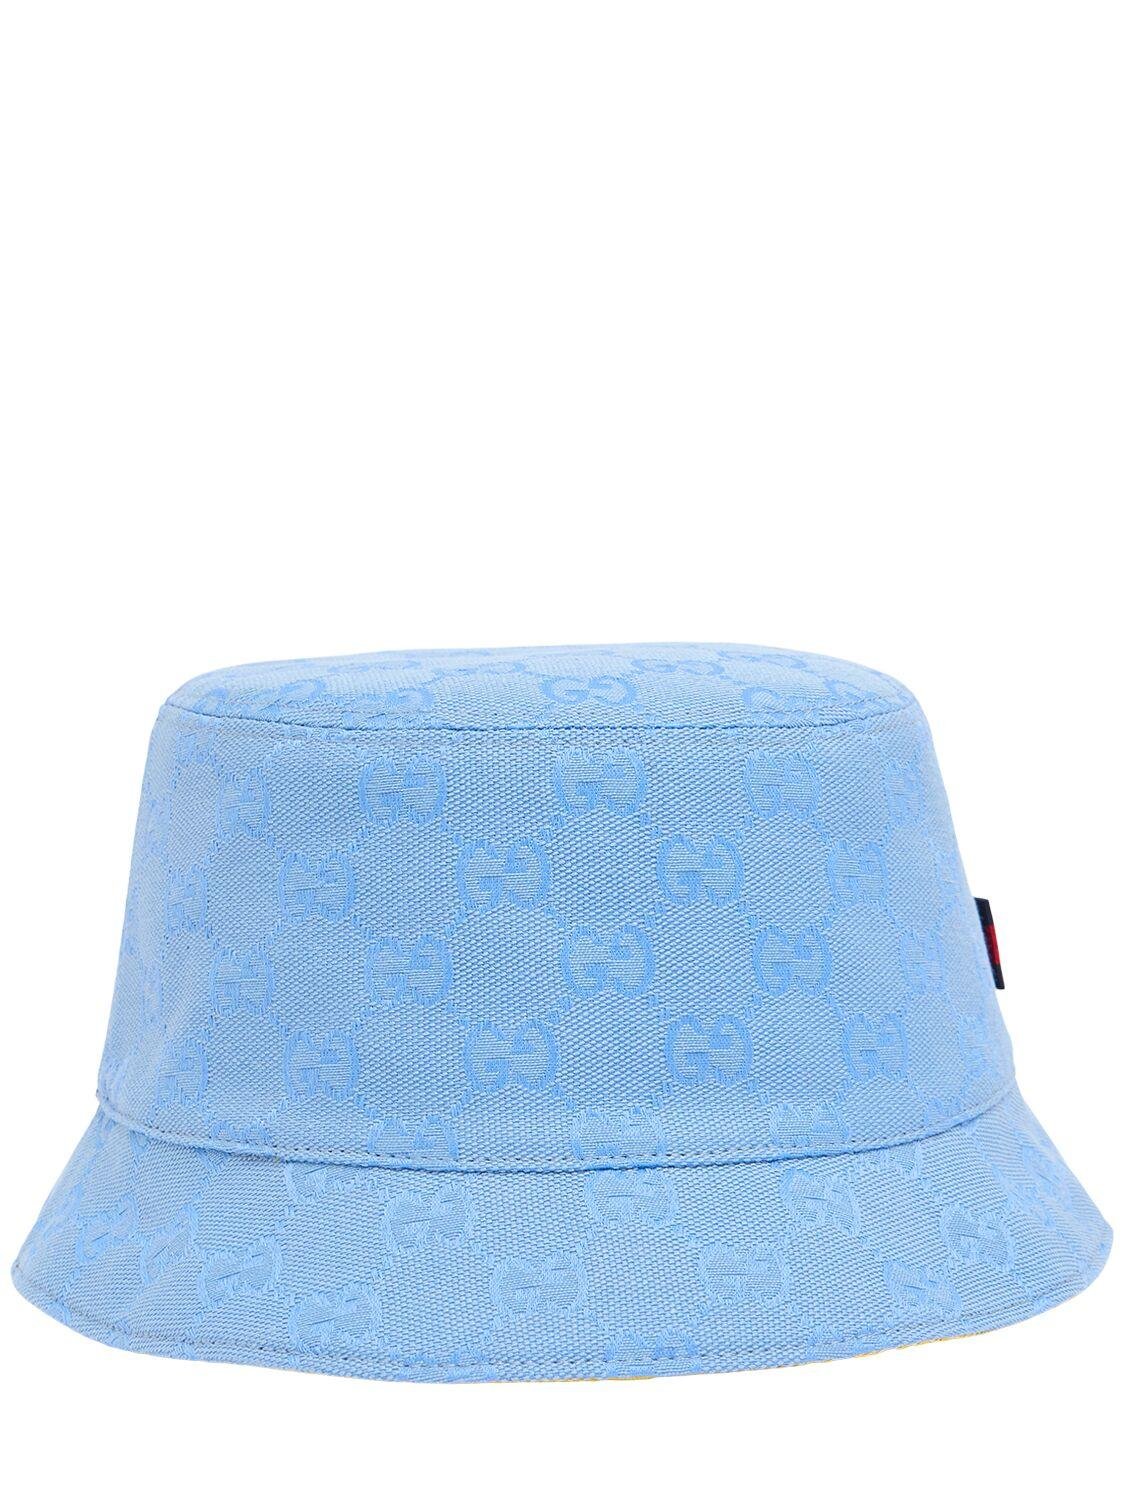 Gg Canvas Bucket Hat by GUCCI